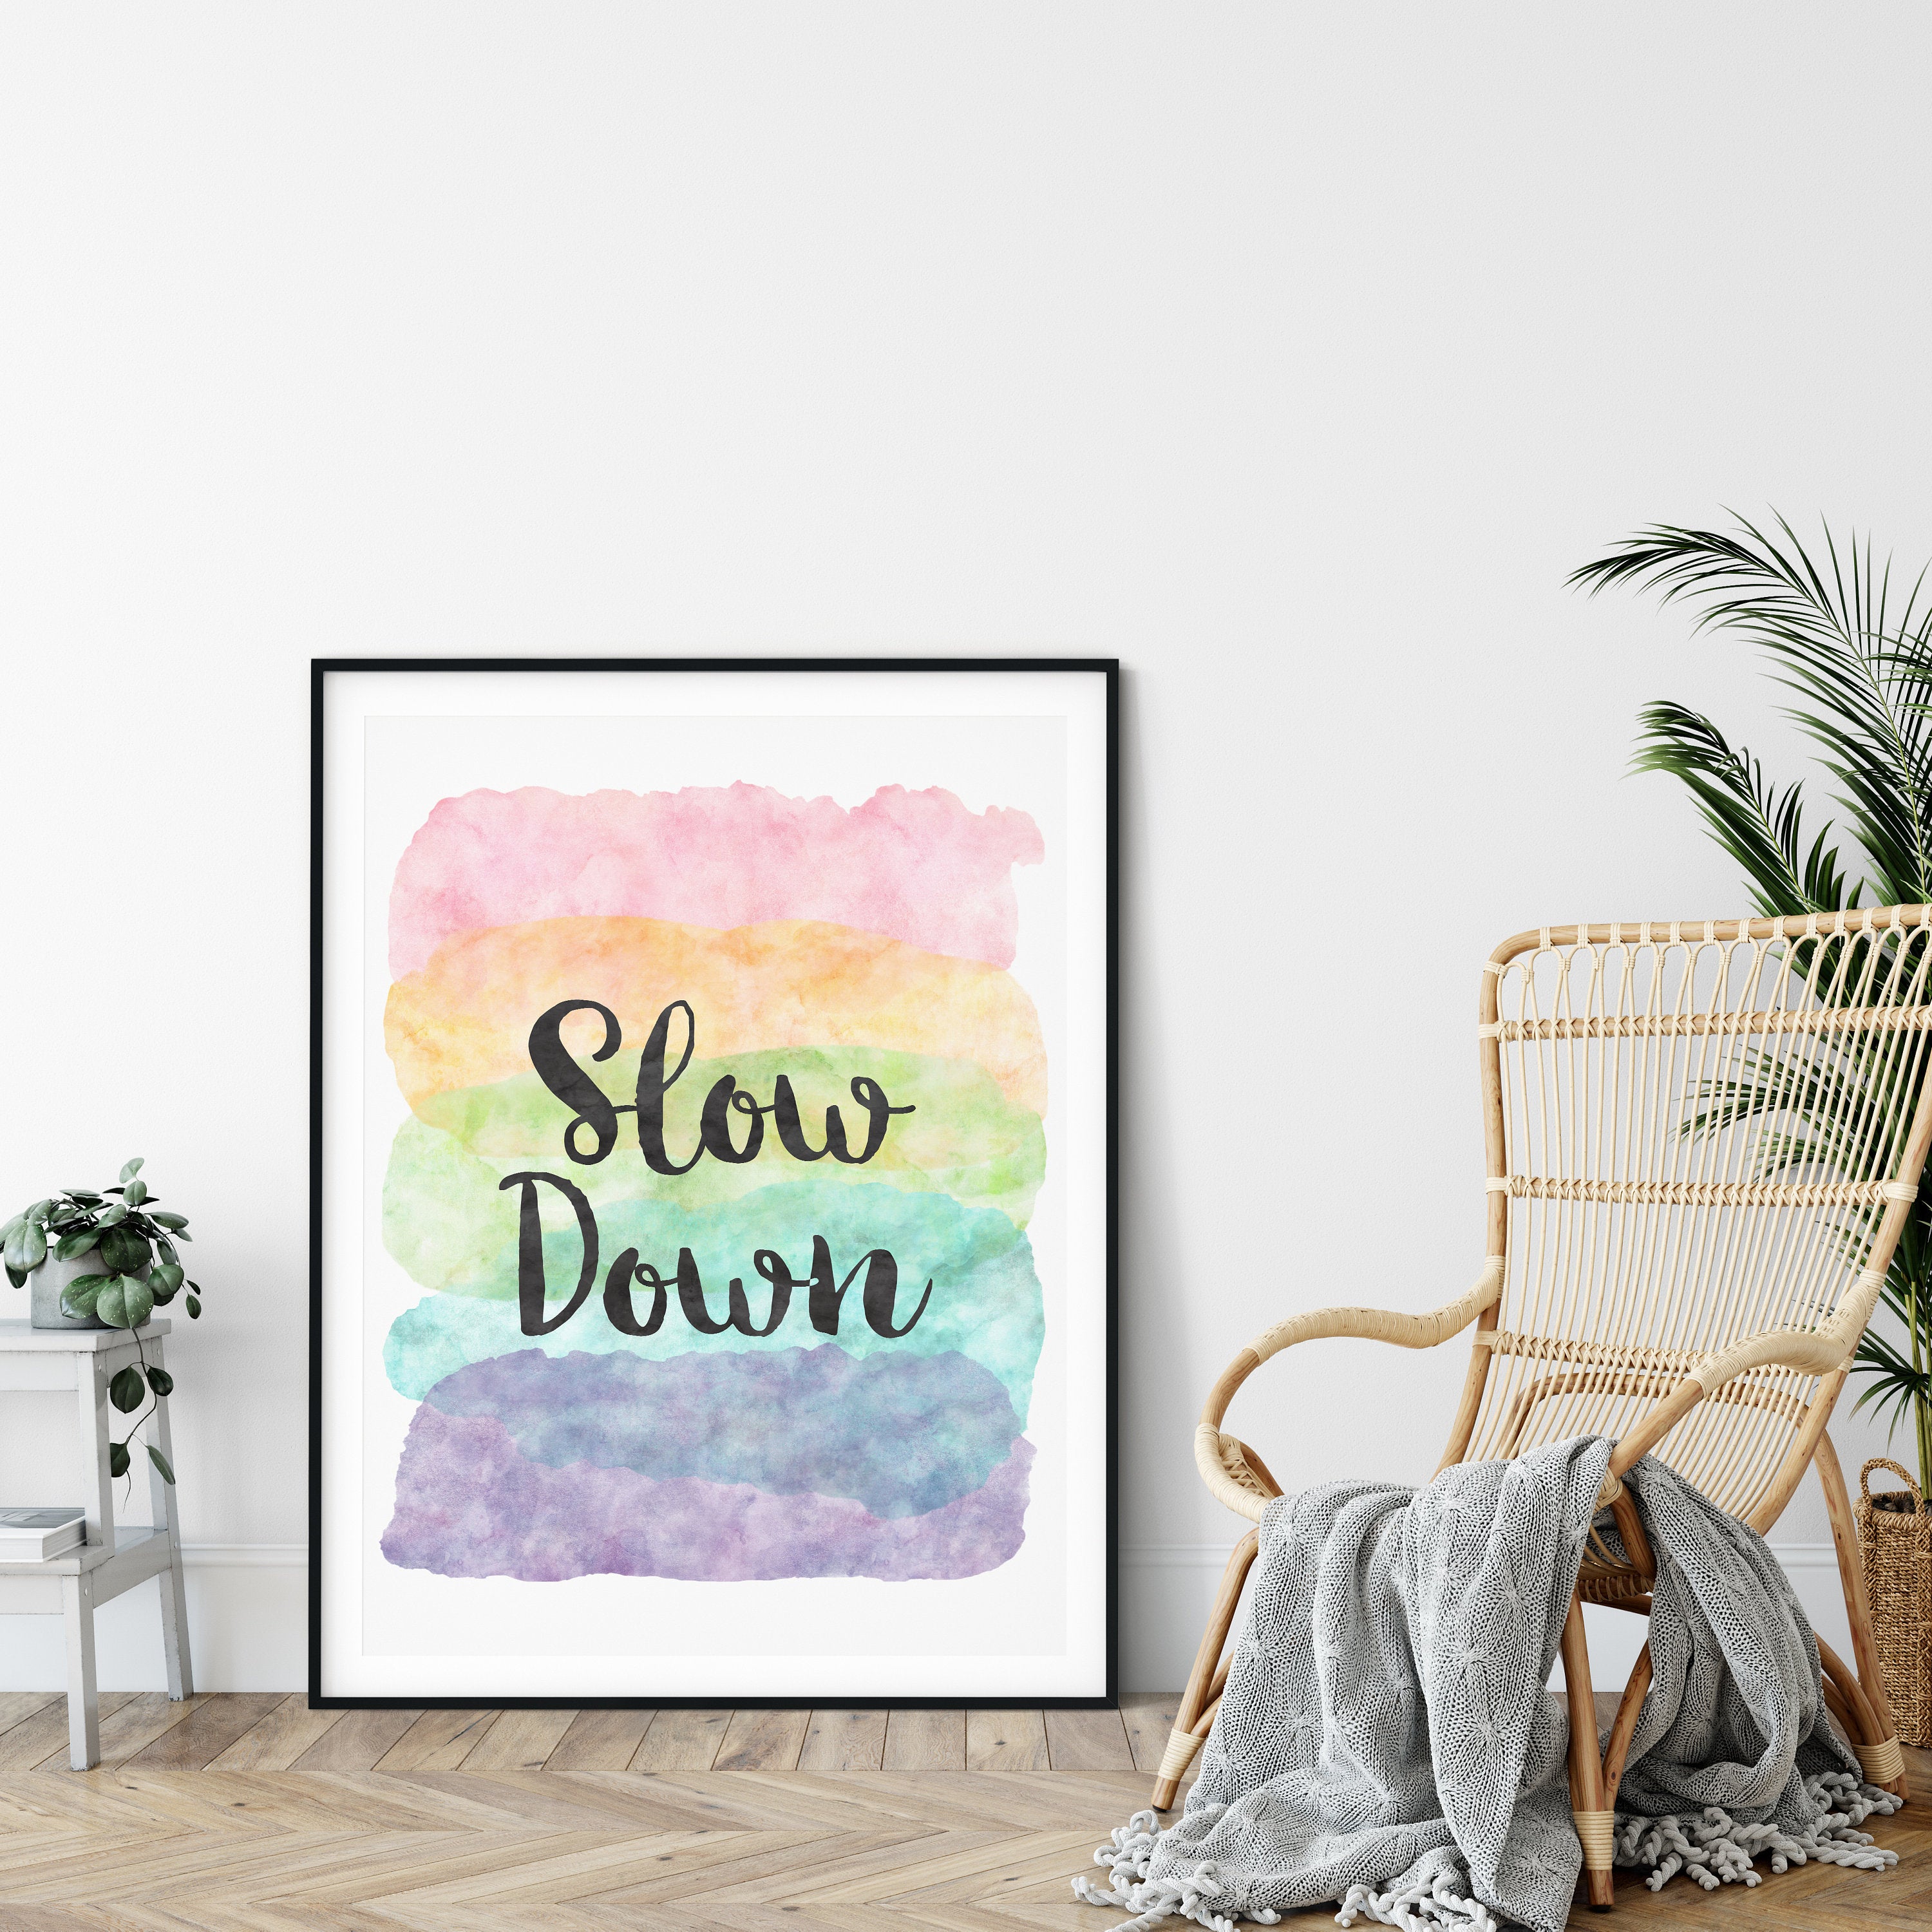 Slow Down Print,Printable Art, Typography Motivational Print, Quote Wall Hanging